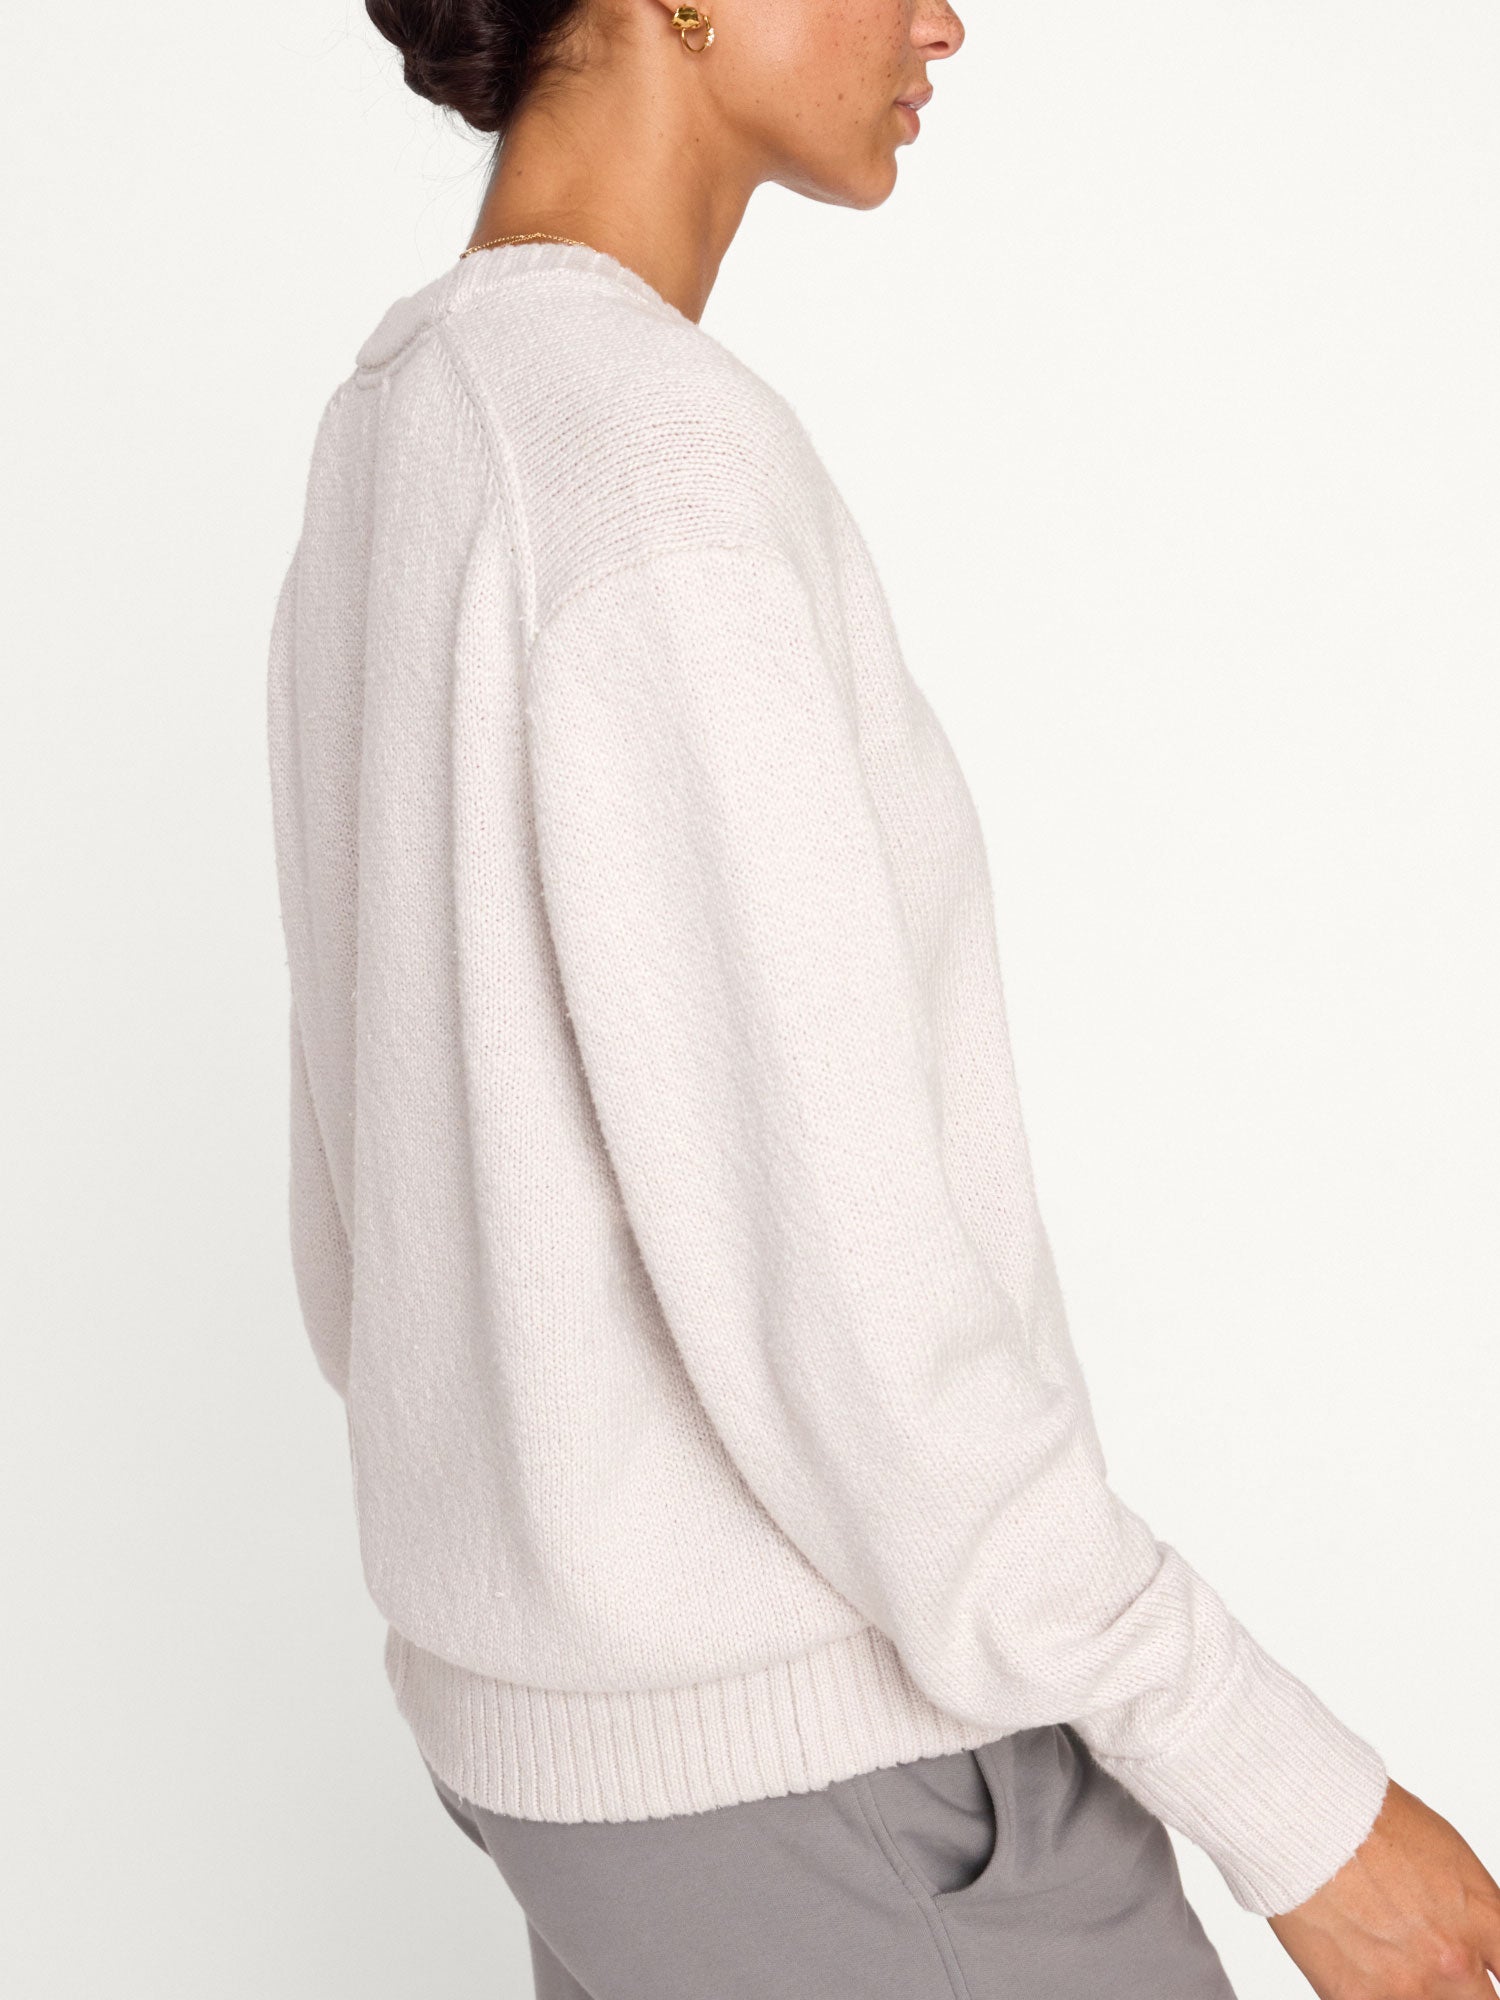 Emery V Neck Chunky Ribbing off-white sweater side view